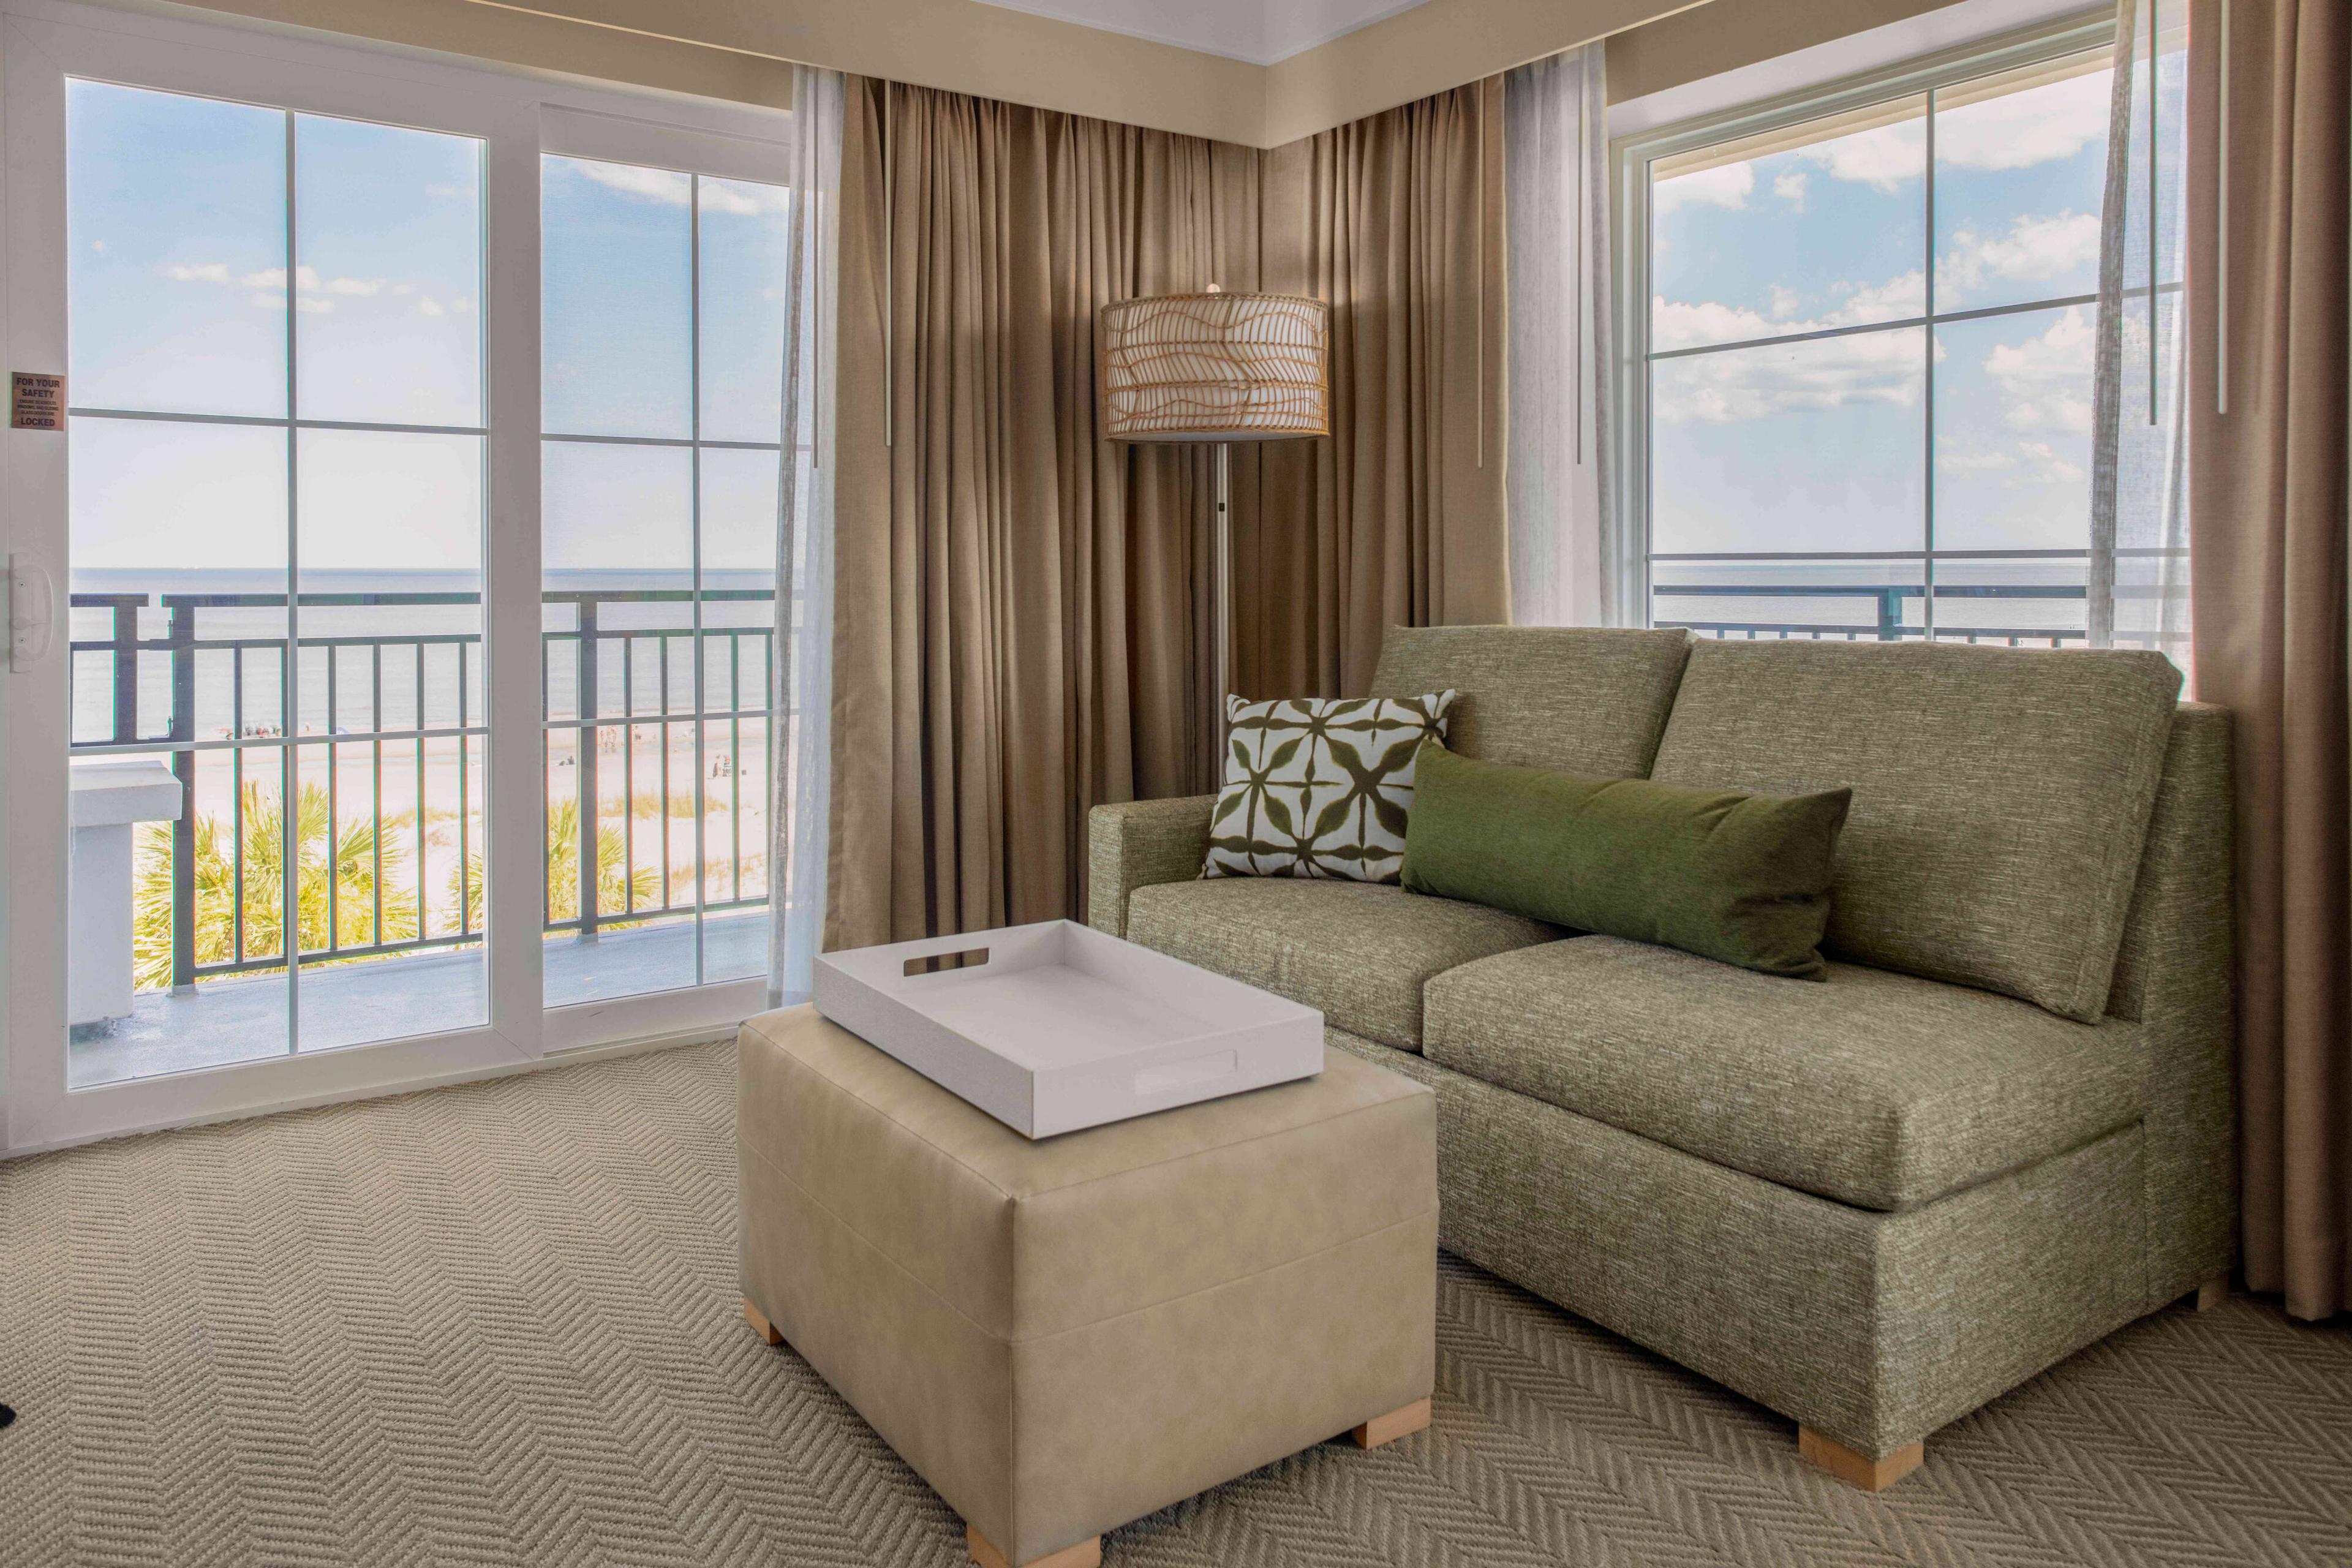 Our Premium Ocean Front King Guest Room offers a luxurious king bed and comfortable sitting Area.